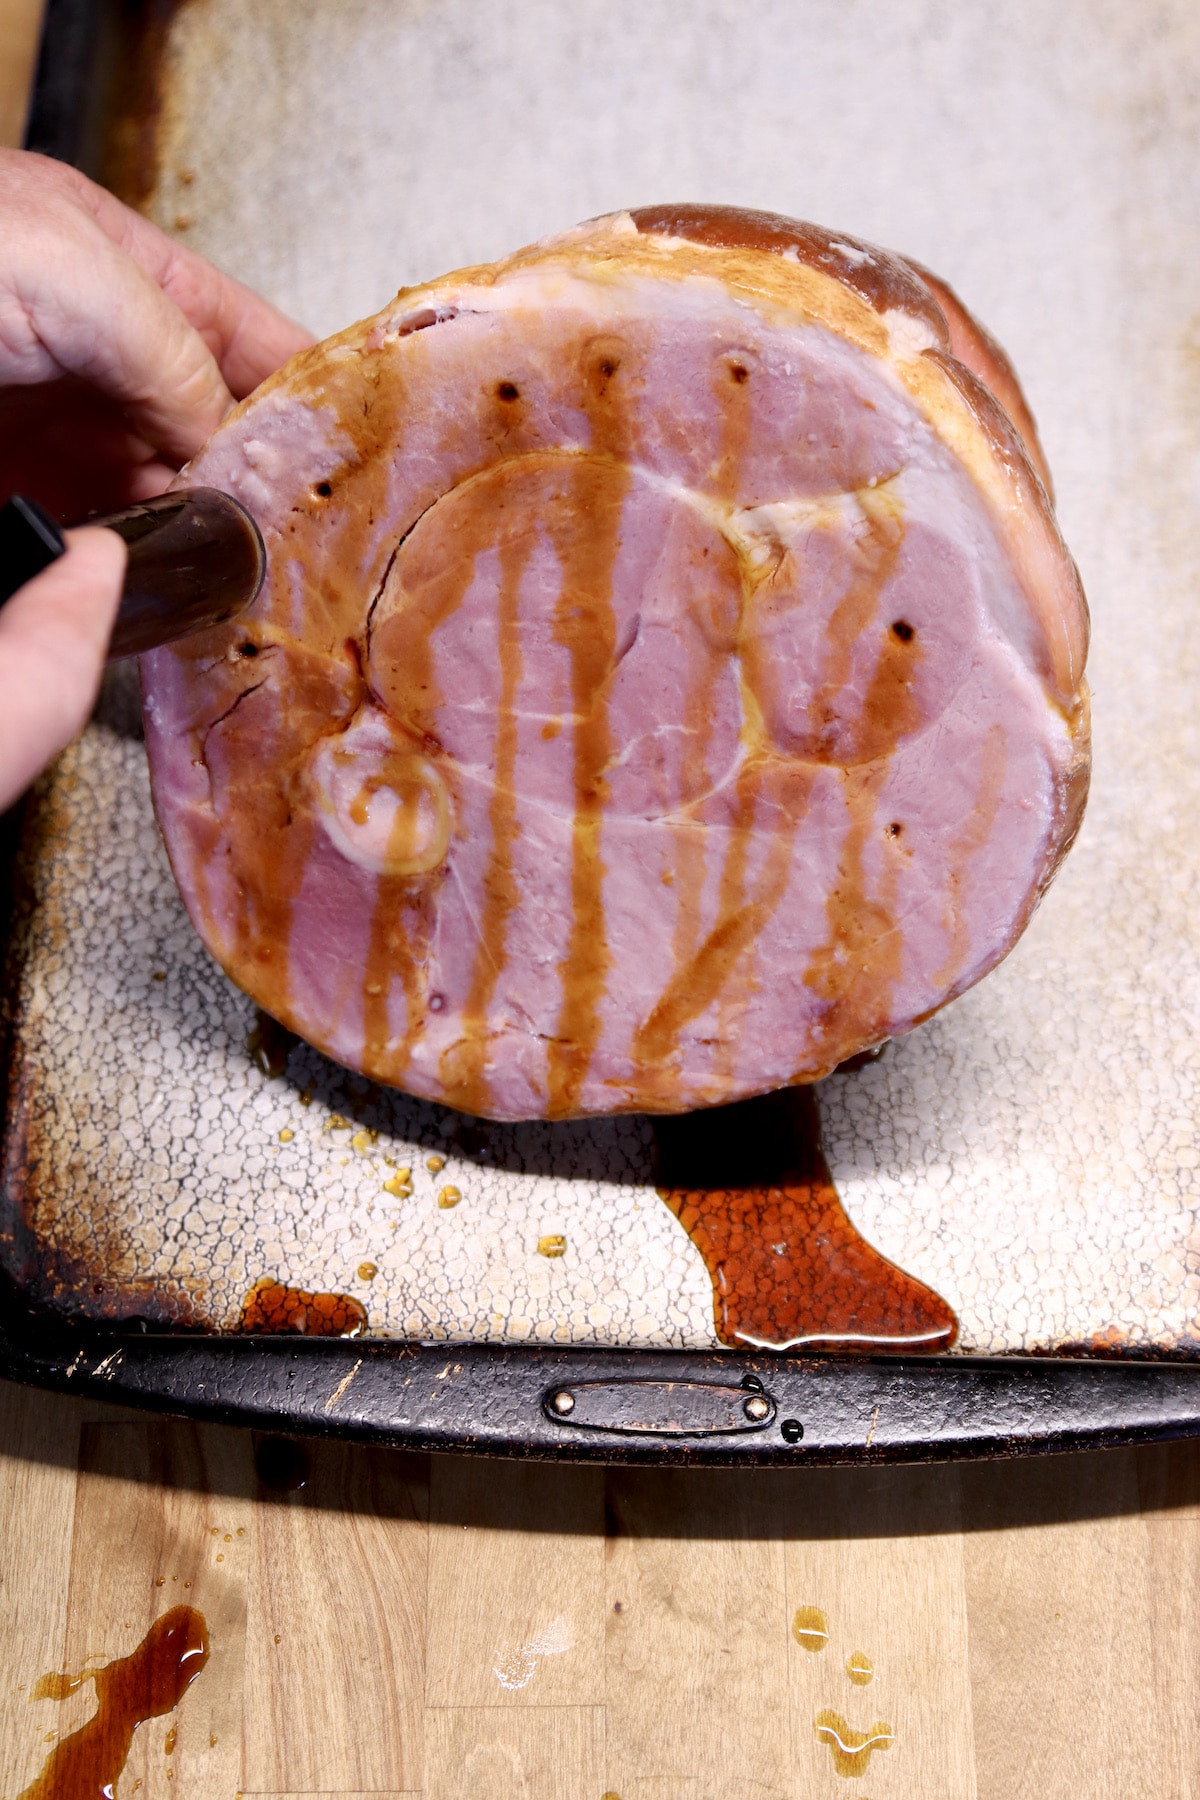 Injecting syrup into ham.